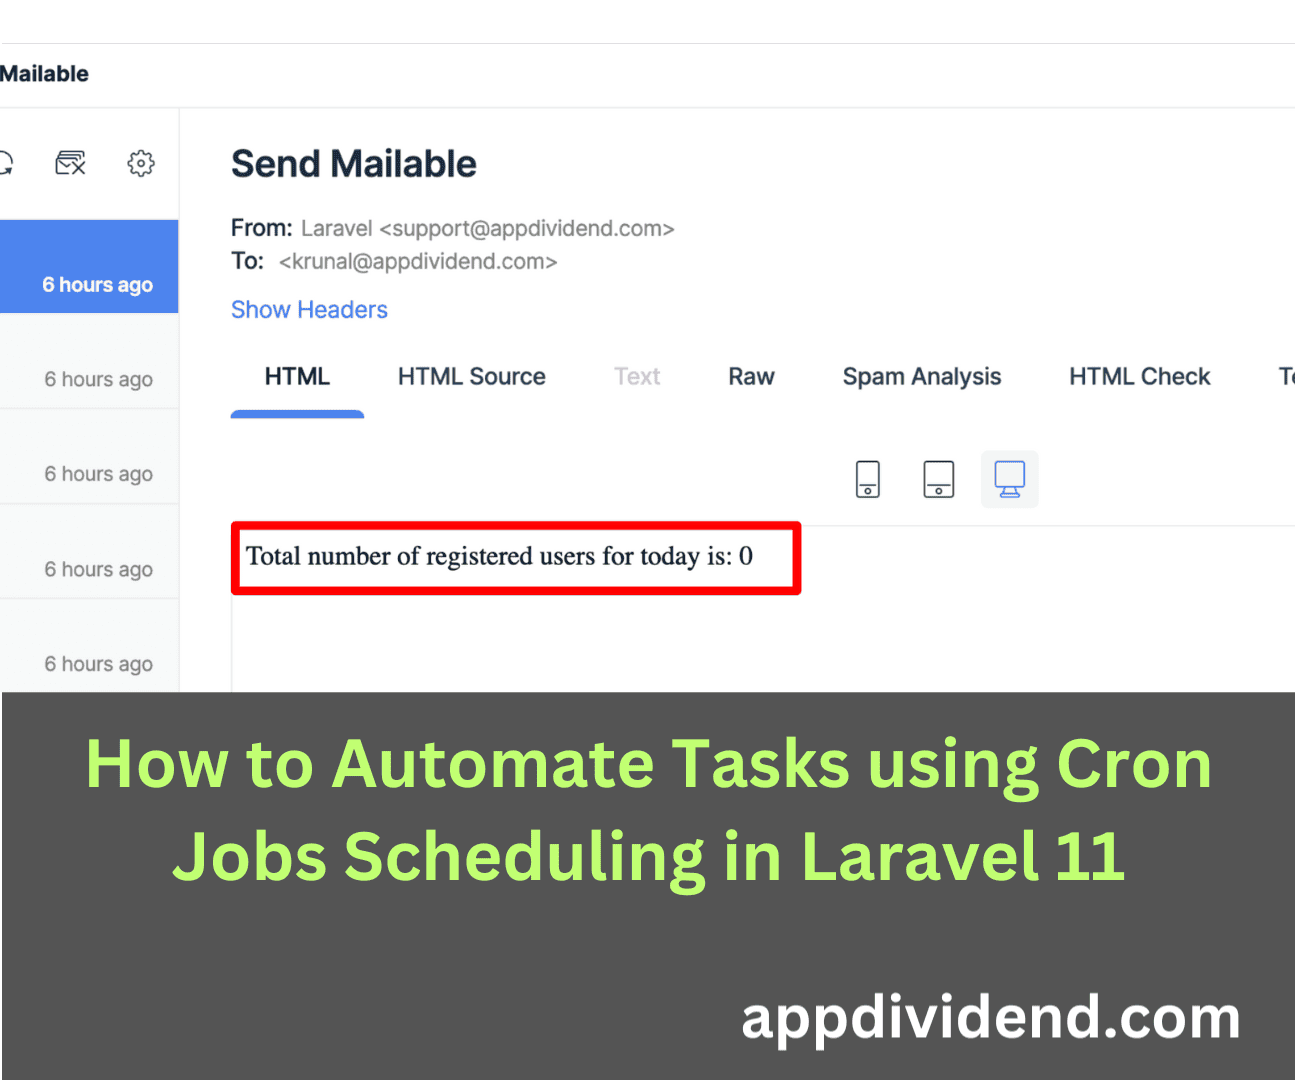 How to Automate Tasks using Cron Jobs Scheduling in Laravel 11